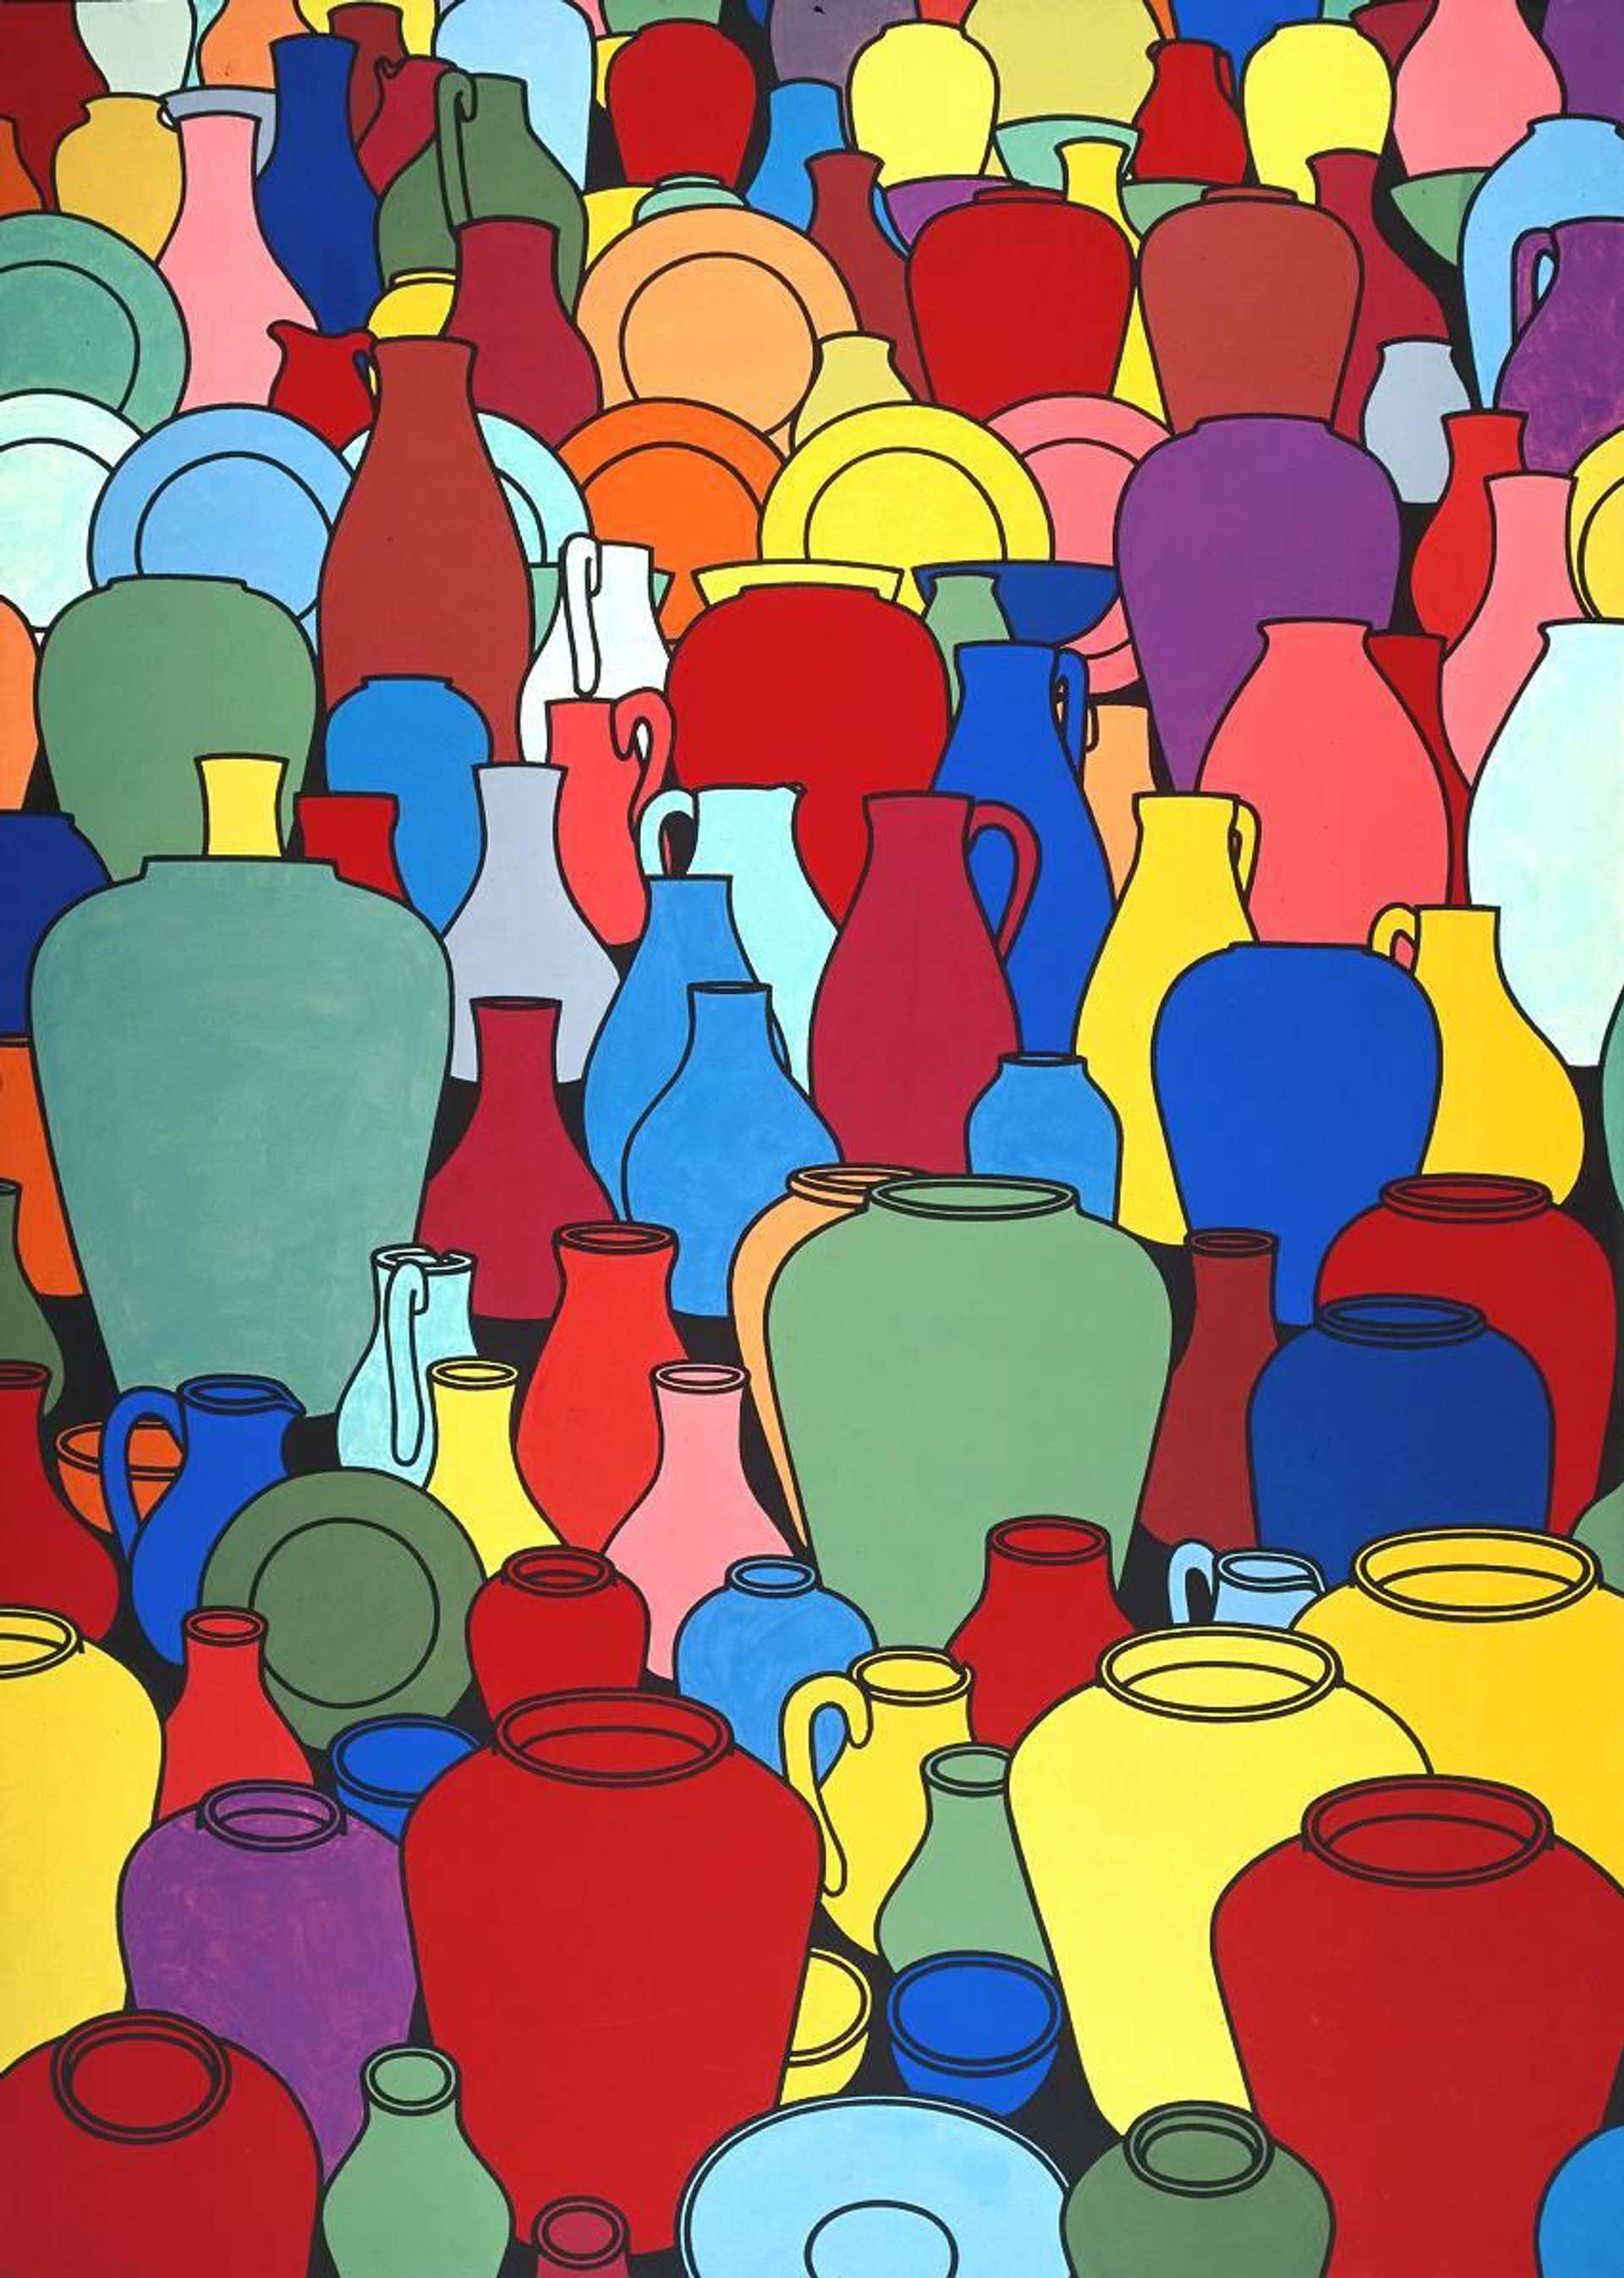 "Pottery" by Patrick Caulfield: An artwork showing various sizes and shapes of pottery in solid colors. The colors are flat and there is no traditional perspective.